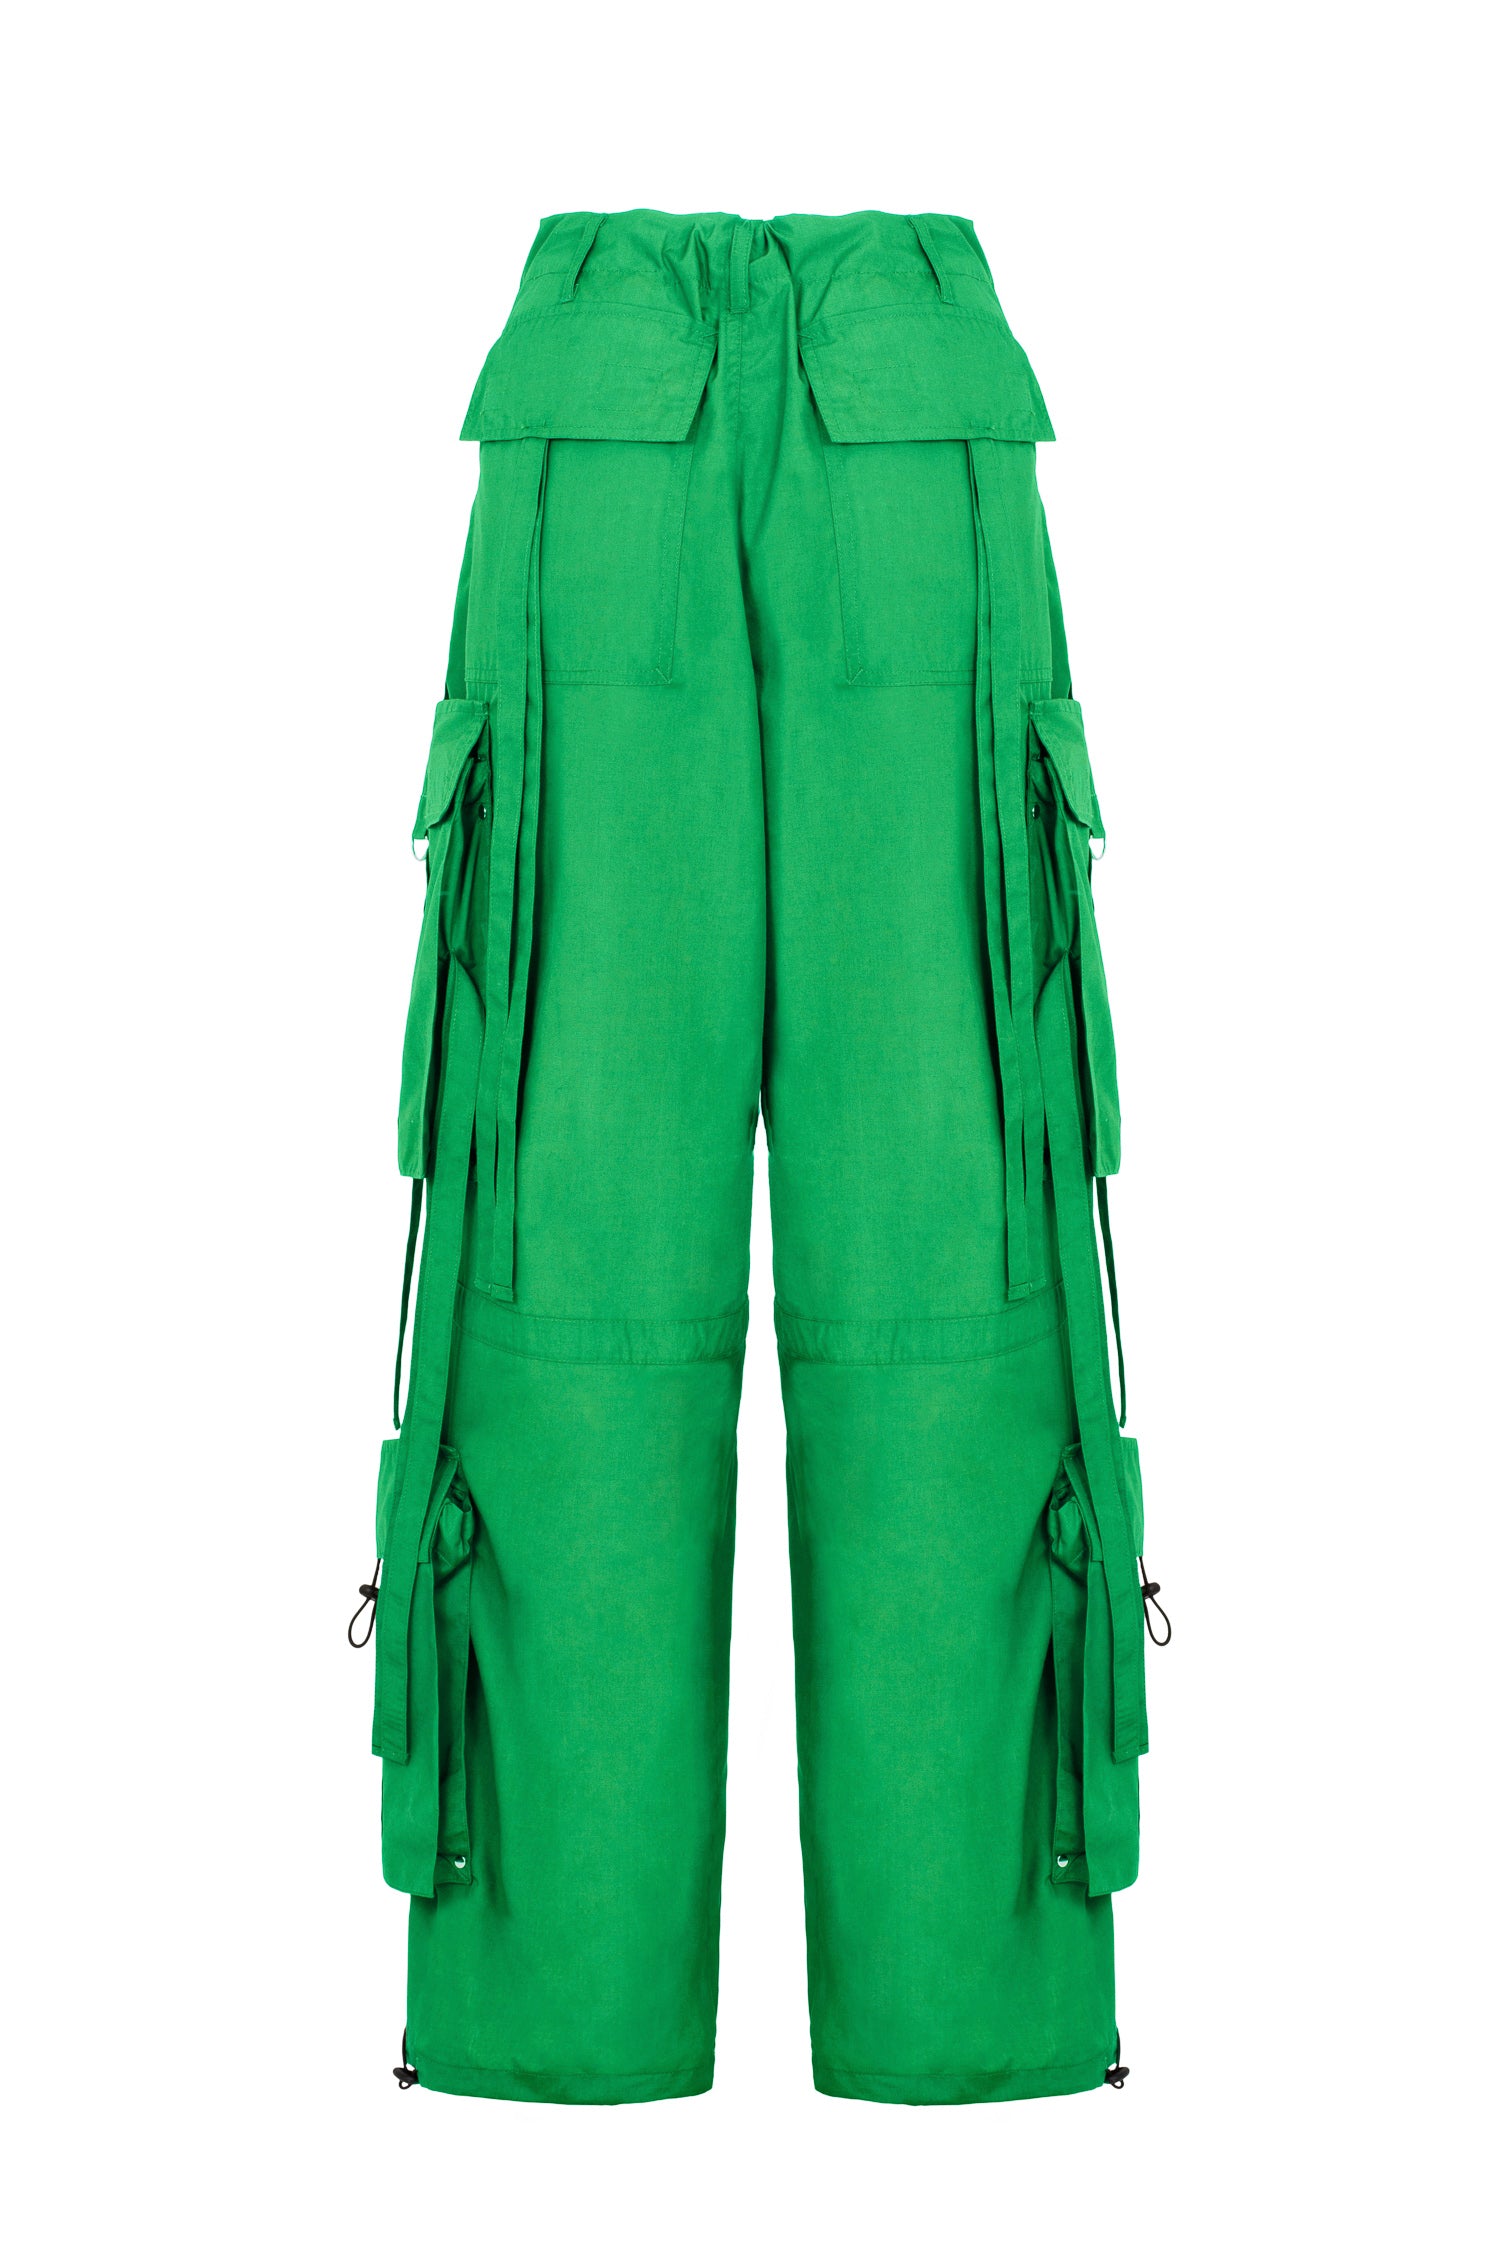 Octopus Trousers